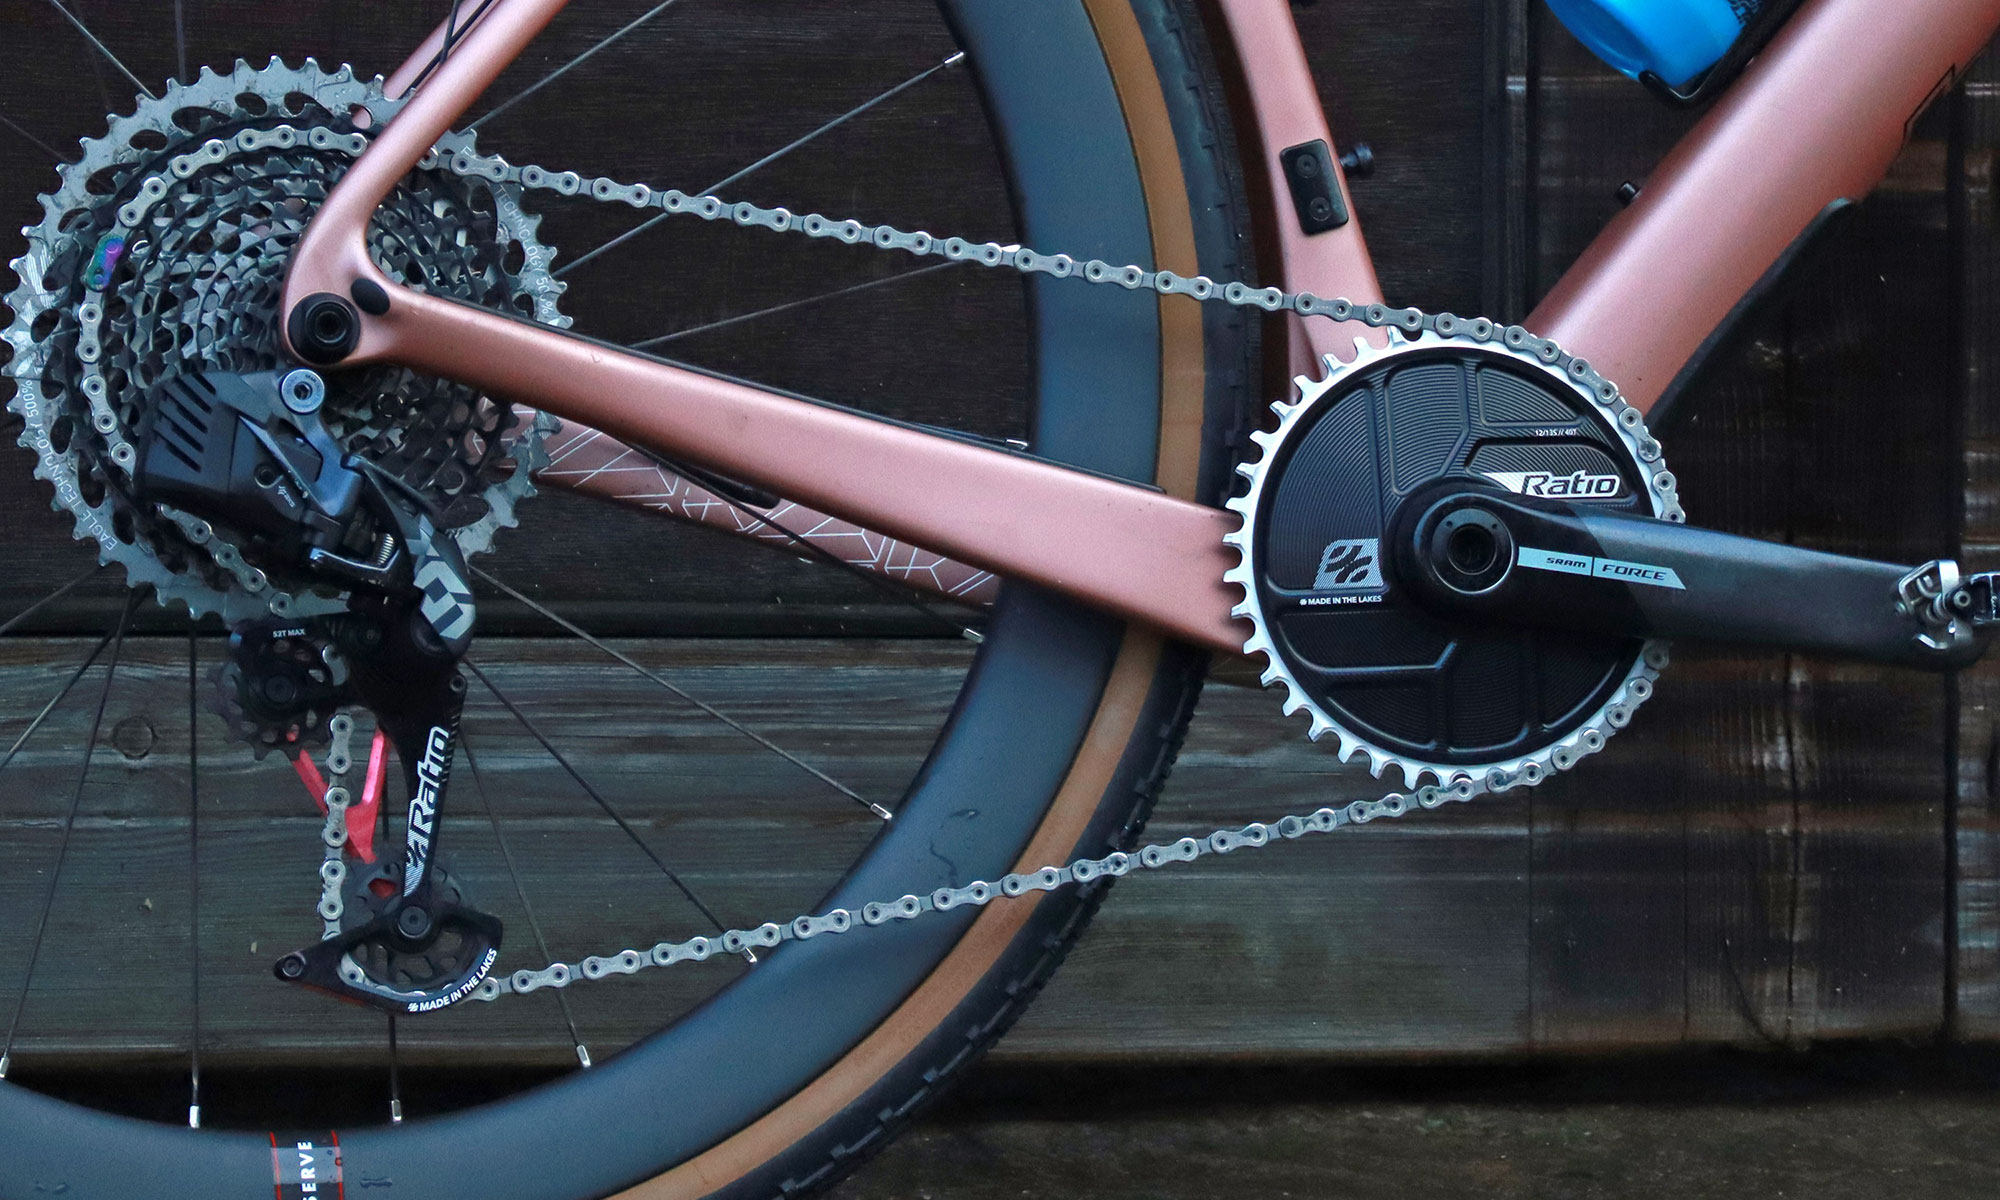 Ratio Direct Mount chainrings, spiderless aero 1x DM rings for 12 and 13-speed, drivetrain